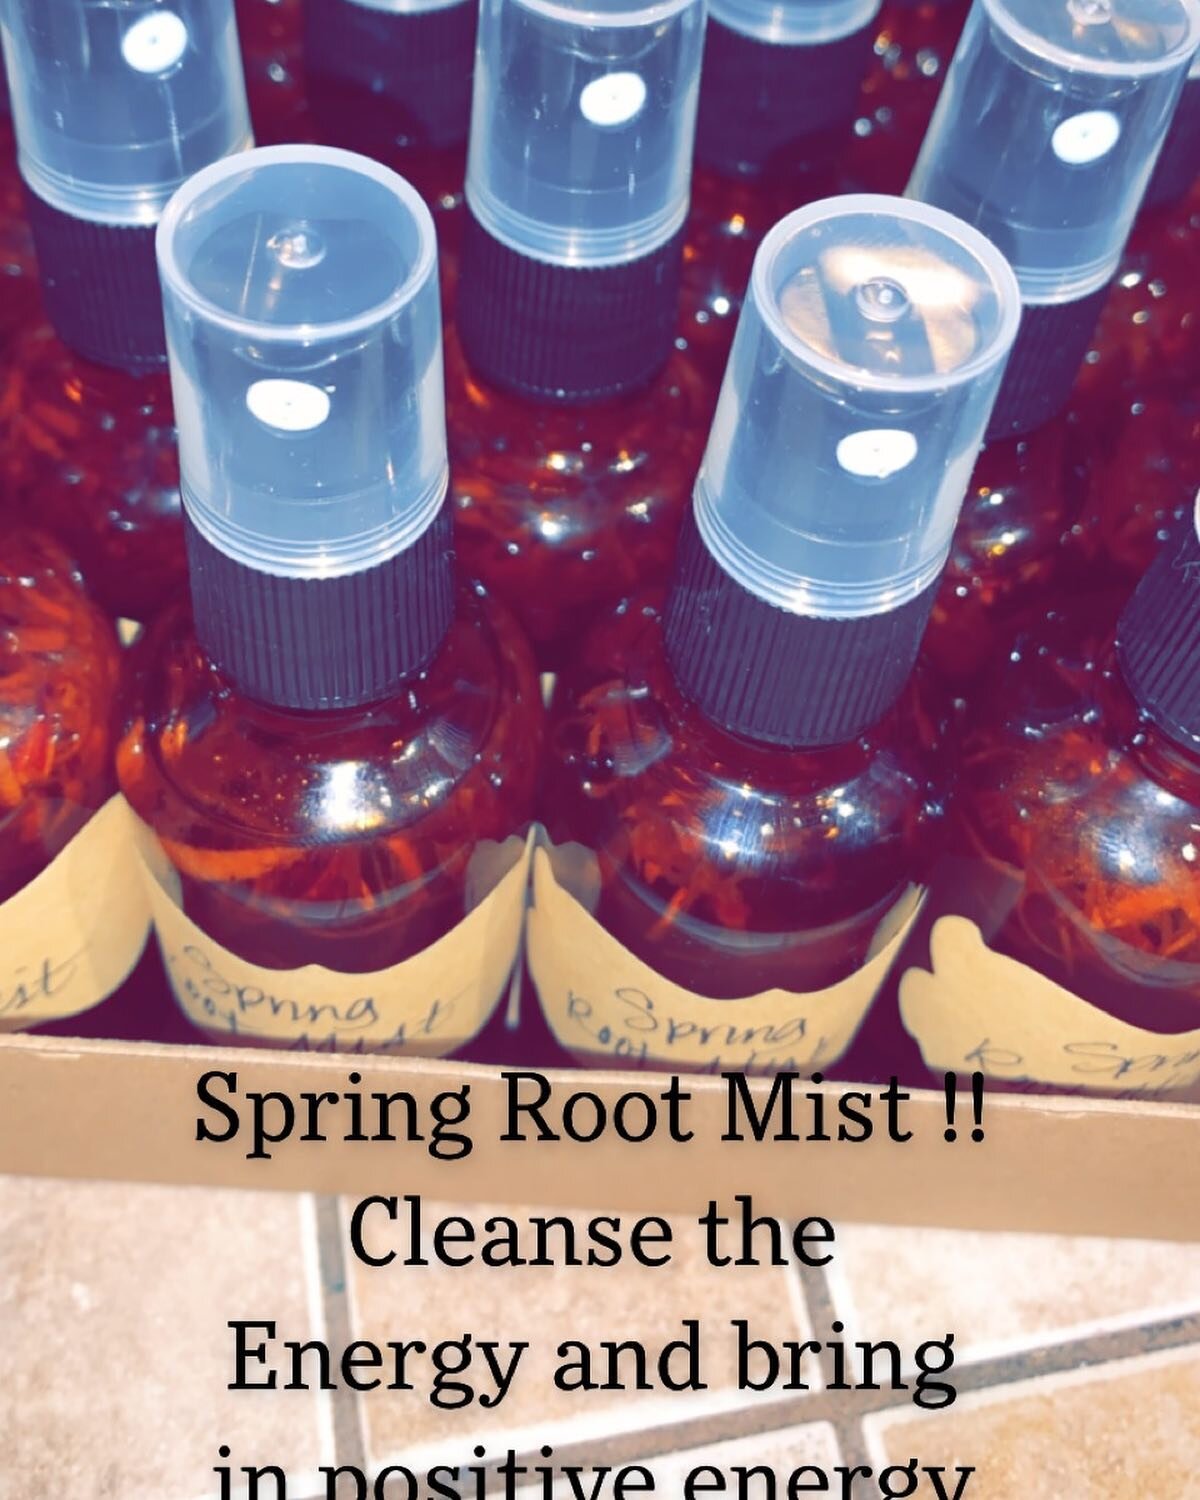 ✨ New Product Alert ✨ (SPRING)Root Mist .....
Cleanse the energy , ground the positivity, and set the vibes ... 

You will absolutely love this fresh spring sent .. made with 7 essential oils .. grounded with special selected crystals , topped with f